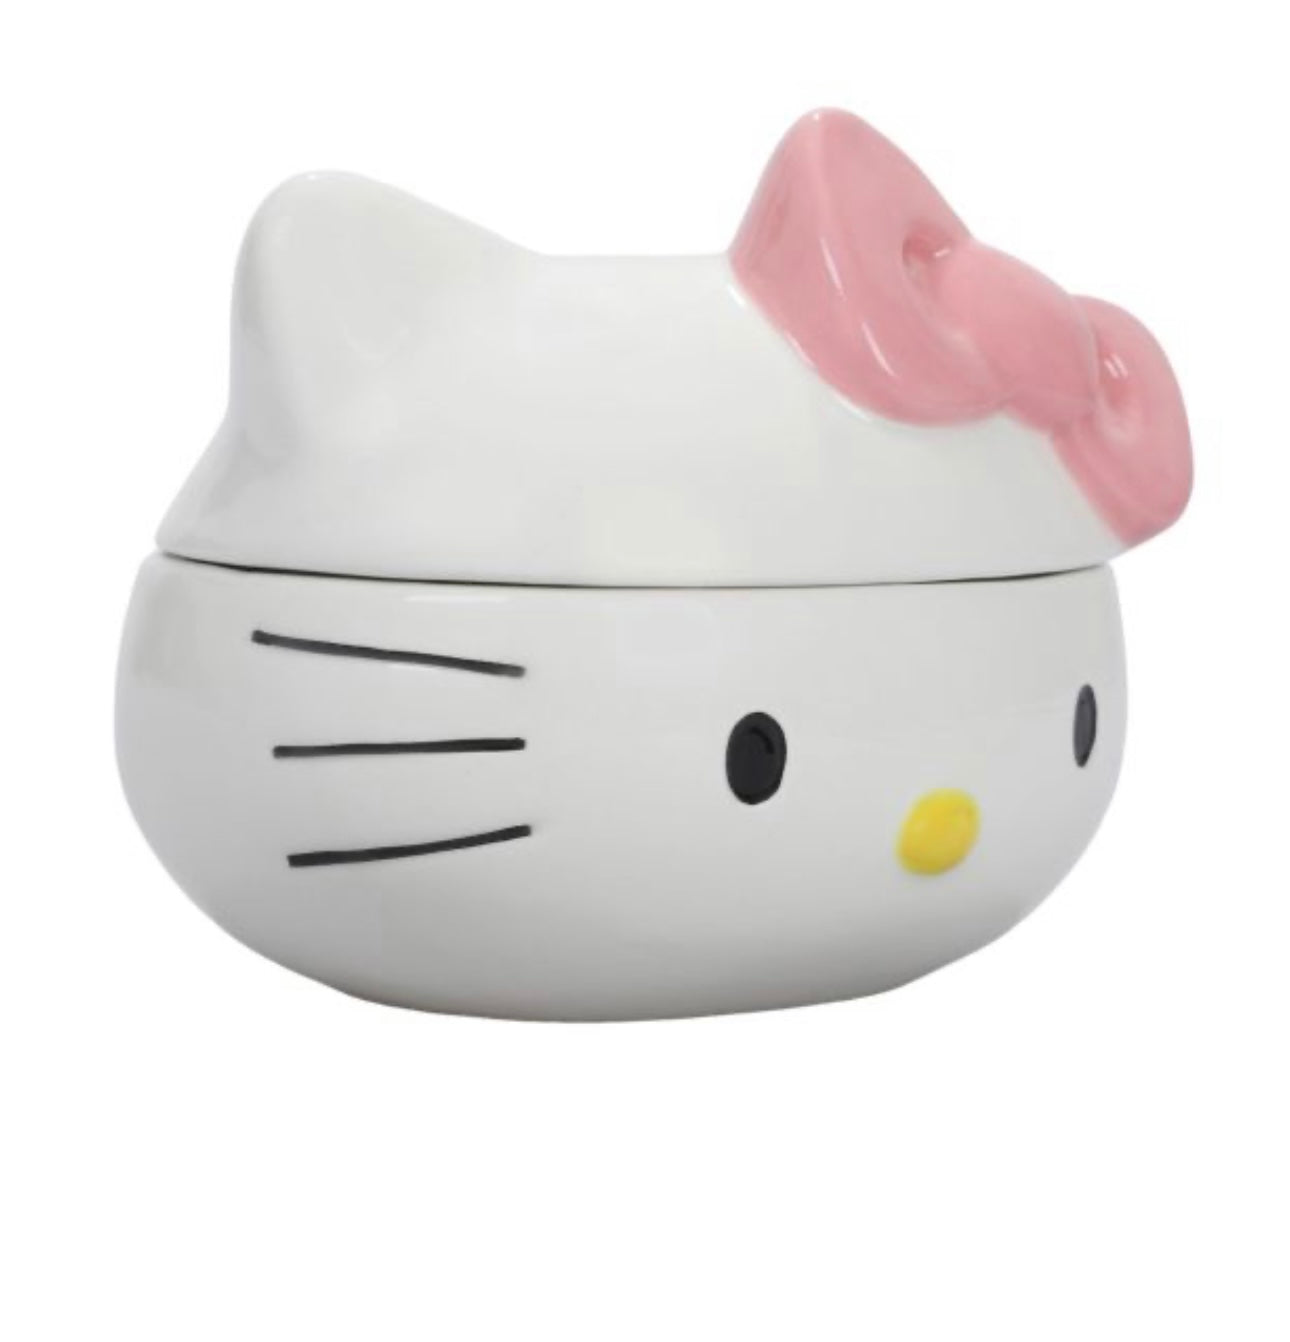 Hello Kitty Sculpted Candy Bowl With Lid